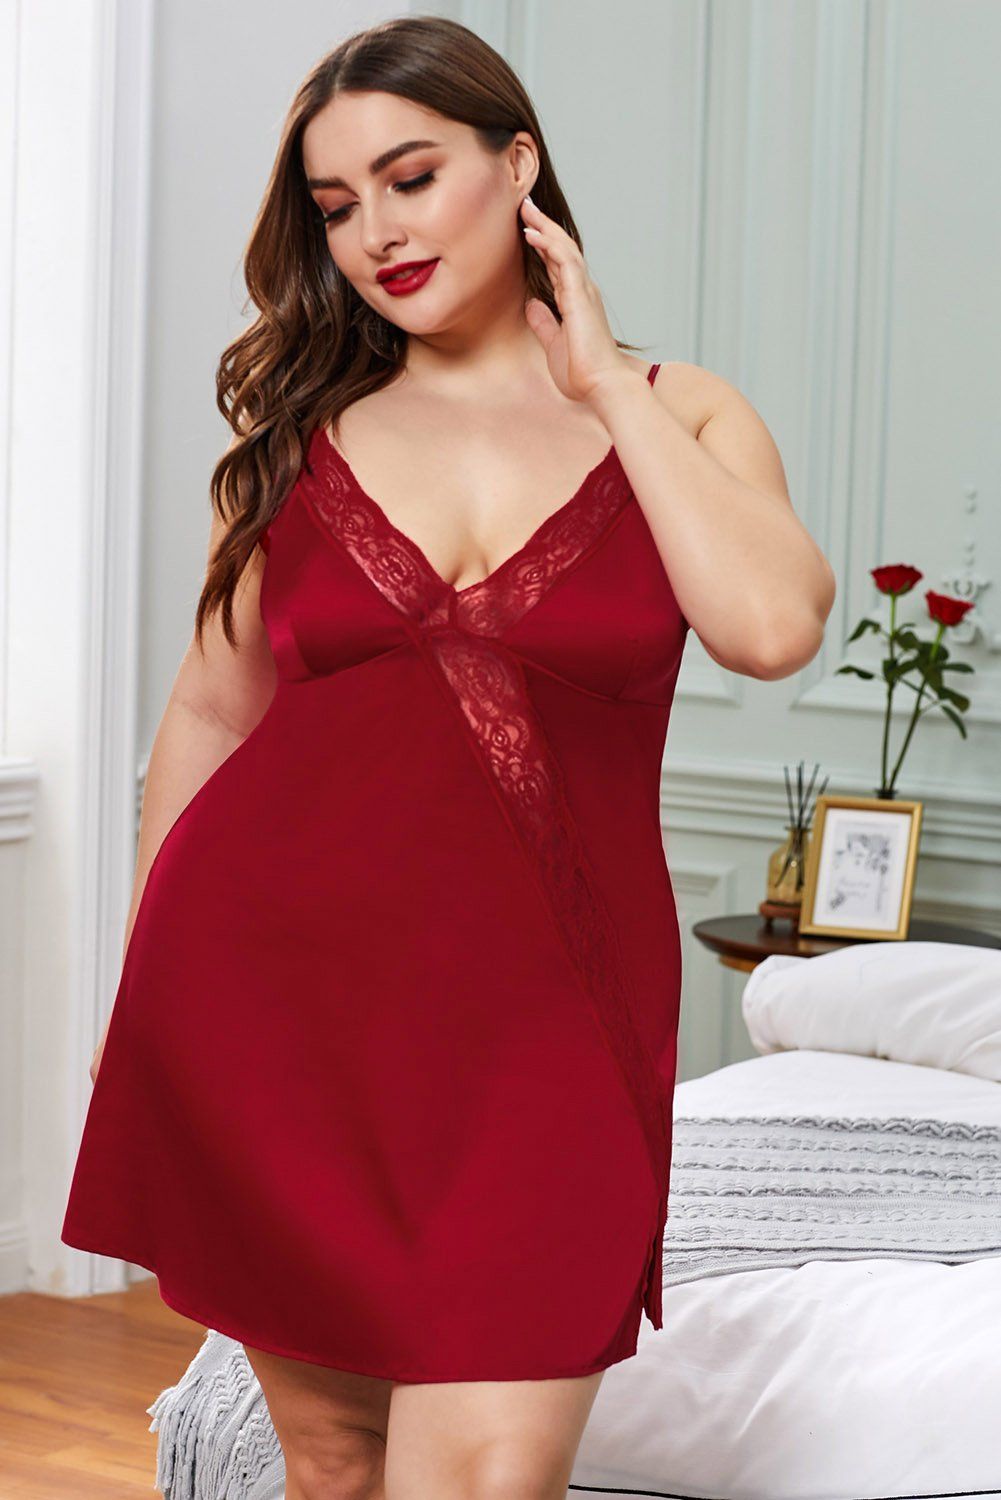 - Charmeuse fabric made which is sleek and soft, very cozy to wear
- Adjustable spaghetti straps, seductive v neck, and oblique lace insert with slits
- Different colors available and plus size for full-figured ladies
- One of our sexiest design for those romantic moments
- Wear sexy lingerie is a good way to spice up
Size Chart (CM).
Sizes.	Bust.	Length.	Trousers Waist.
	Stretched.	Stretched.	Stretched.
0X.	97.	77.	80.
1X.	104.	79.	87.
2X.	111.	81.	94.
3X.	118.	83.	101.
4X.	125.	85.	108.
5X.	132.	87.	115.
Elasticity.	None.
. . . Note:
1.There maybe 1 -2 cm. deviation in different sizes, locations and stretch of fabrics. Size chart is for reference only, there may be a little difference with what you get.
2.There are 3 kinds of elasticity: High Elasticity (two-sided stretched), Medium Elasticity (one-sided stretched) and Nonelastic (can not stretched).
3.Color may be lighter or darker due to the different PC display.
4.Wash it by hand in 30-degree water, hang to dry in shade, prohibit bleaching.
5.There maybe a slightly difference on detail and pattern.